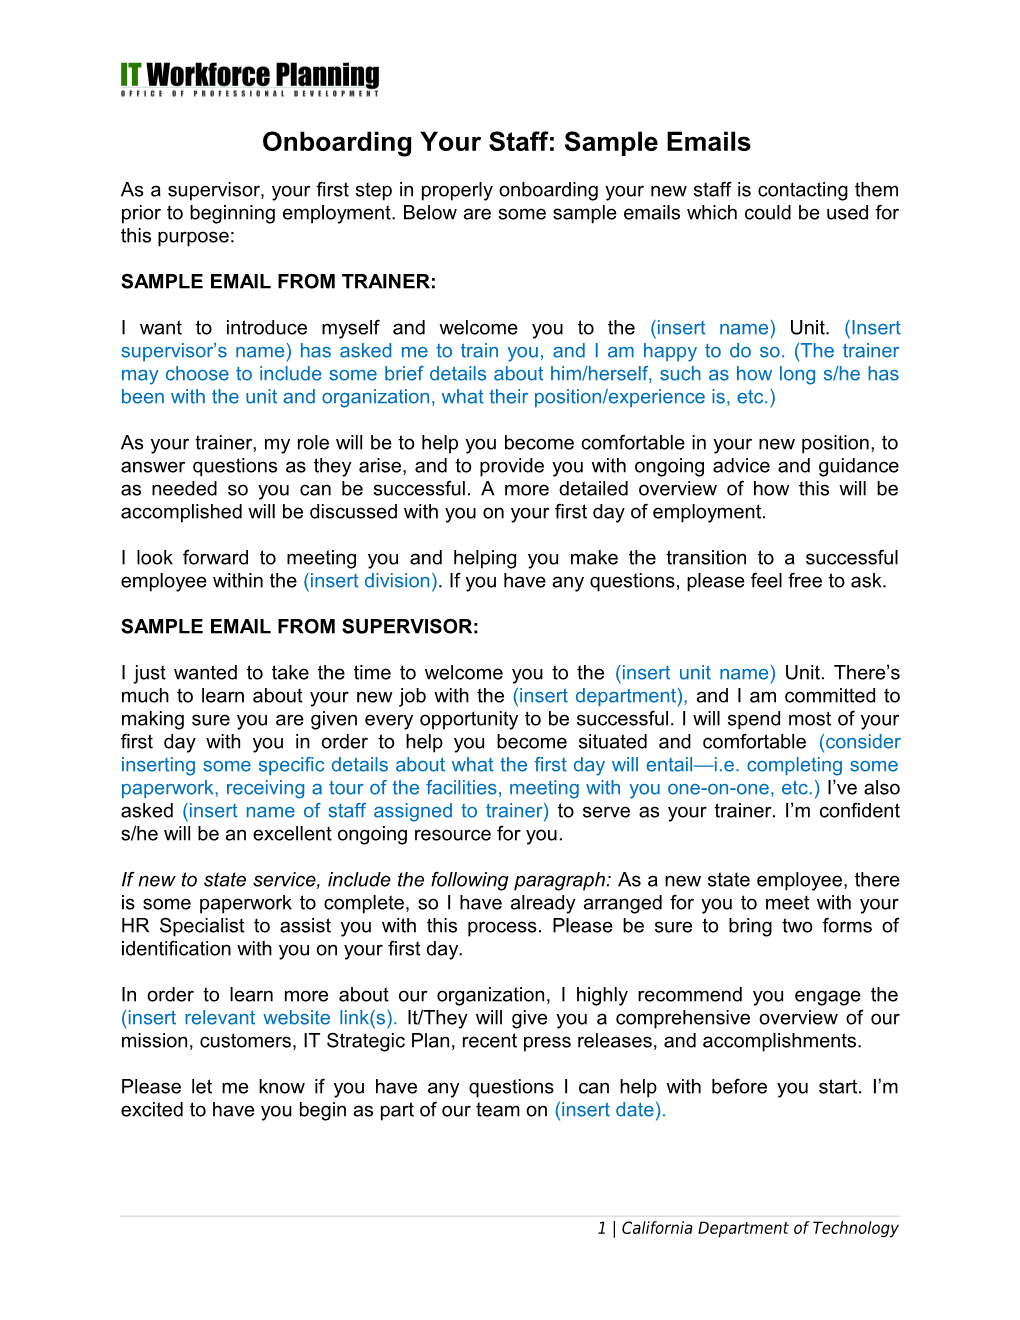 Onboarding Your Staff: Sample Emails